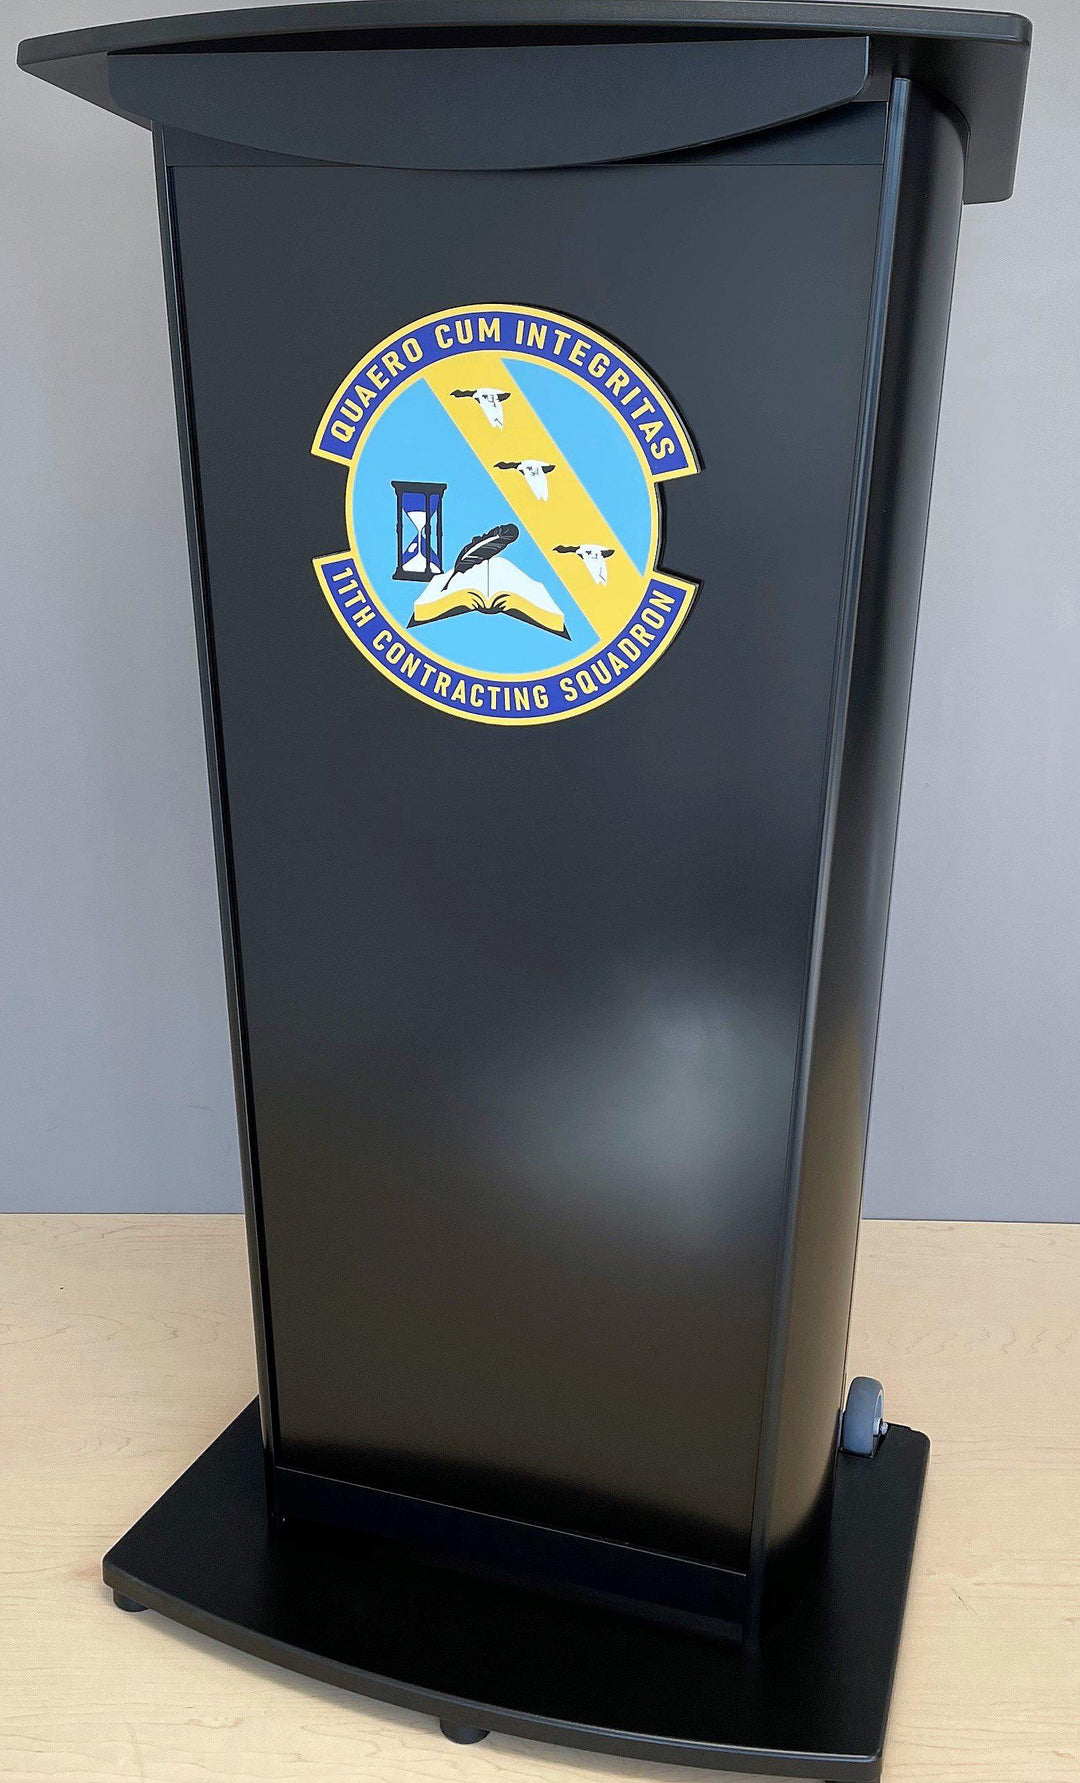 Contemporary Lecterns and Podiums VH1 Deluxe Aluminum Lectern-Example of 3D Logo-Contemporary Lecterns and Podiums-Podiums Direct